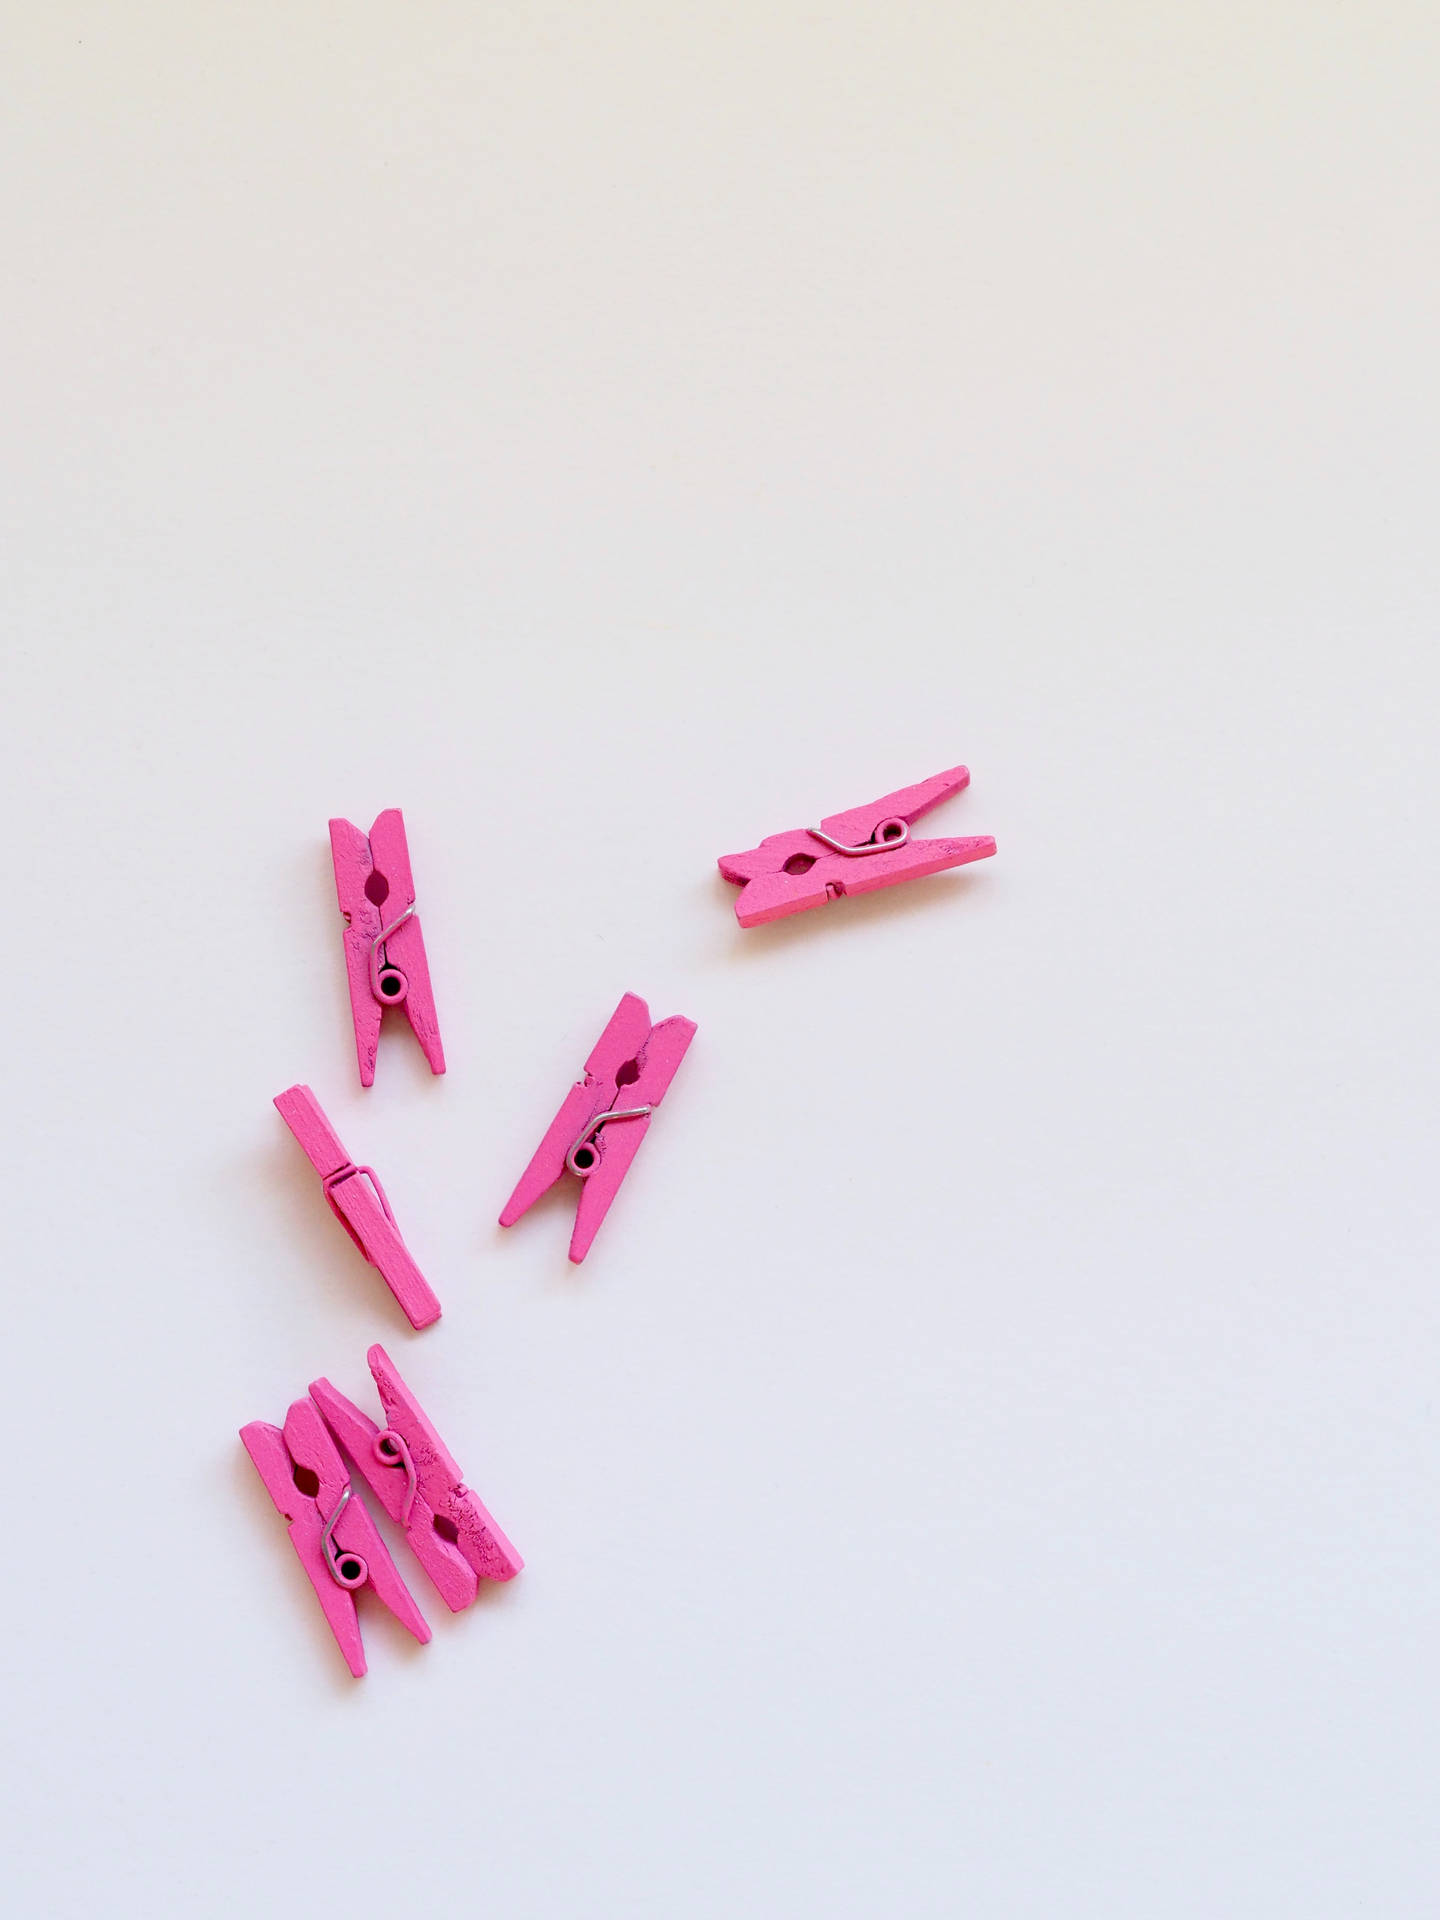 Pink Clippers On White Background